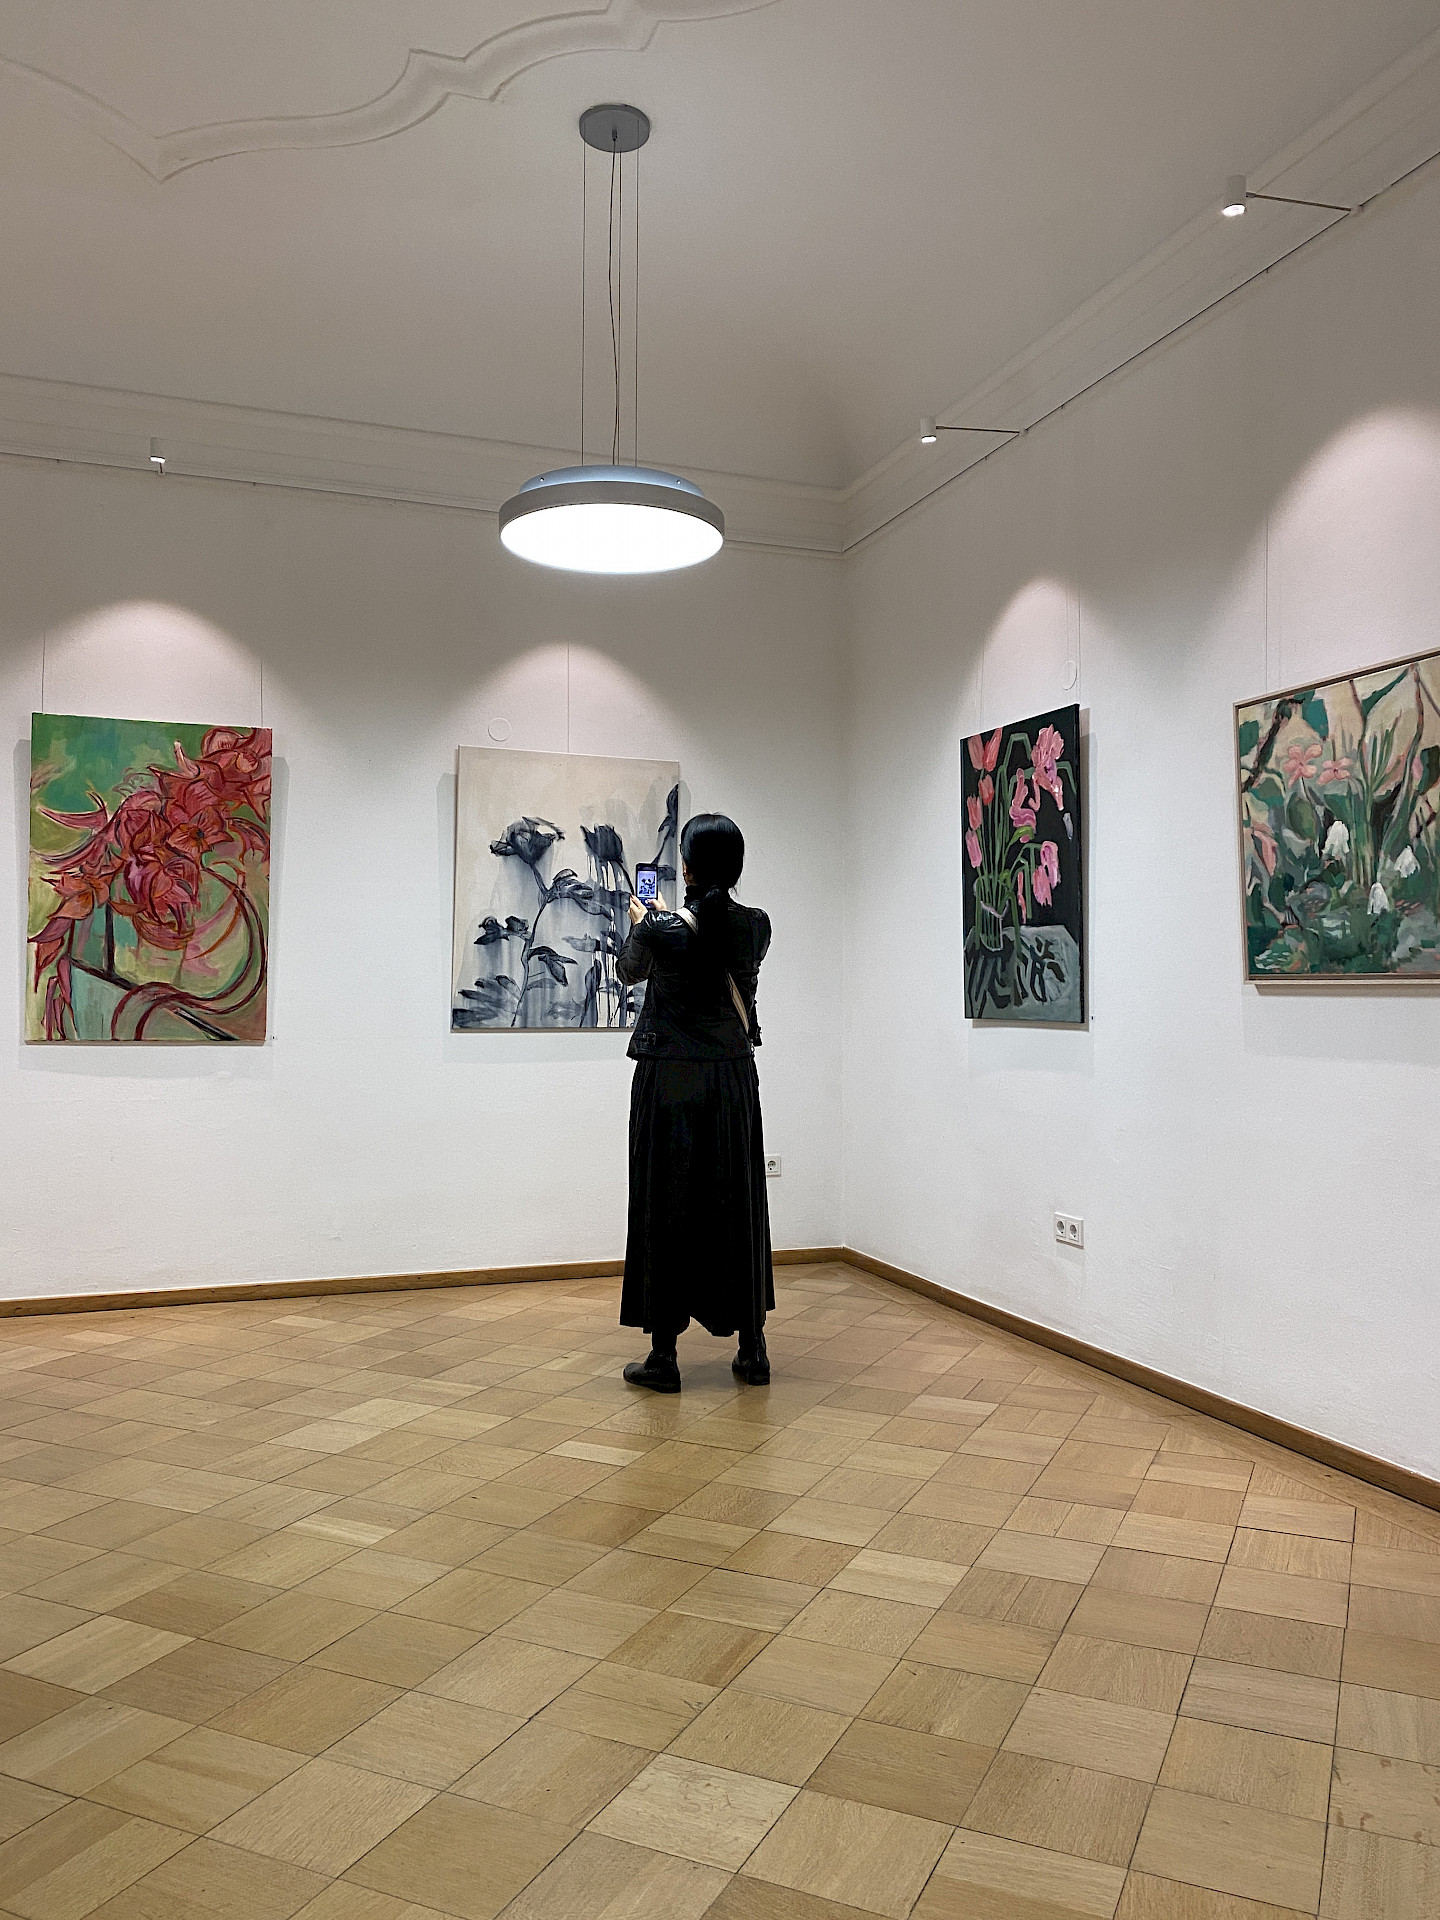 Insight into the exhibition with works by Isabelle Chrétien Brocker, Edith Steiner and Martina B'shary